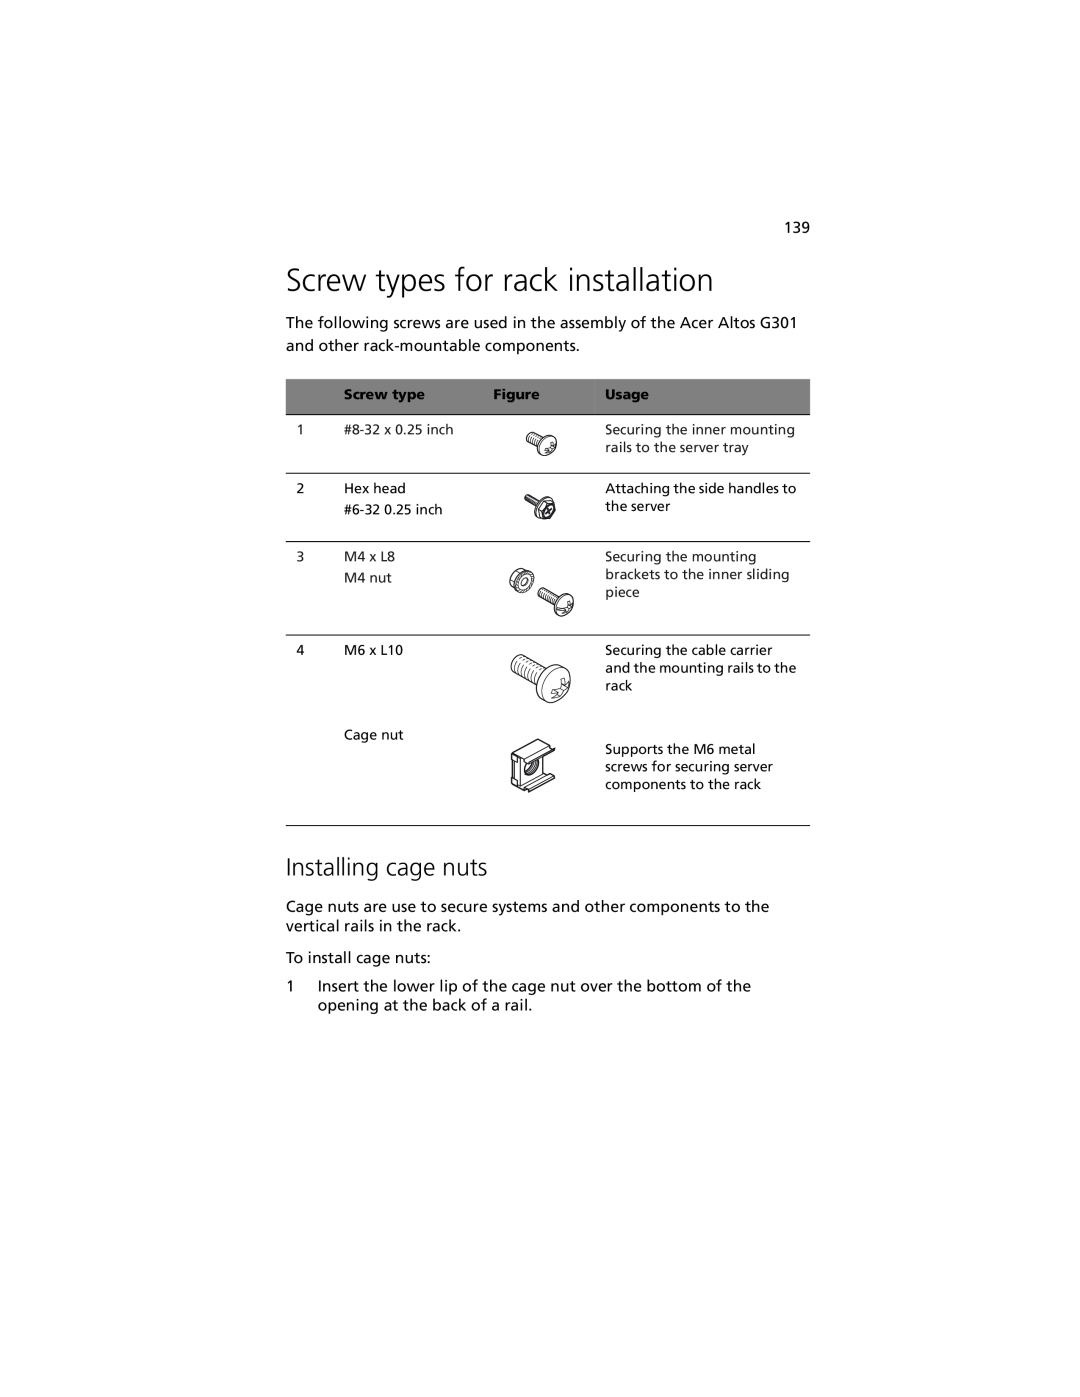 Acer G301 manual Screw types for rack installation, Installing cage nuts 